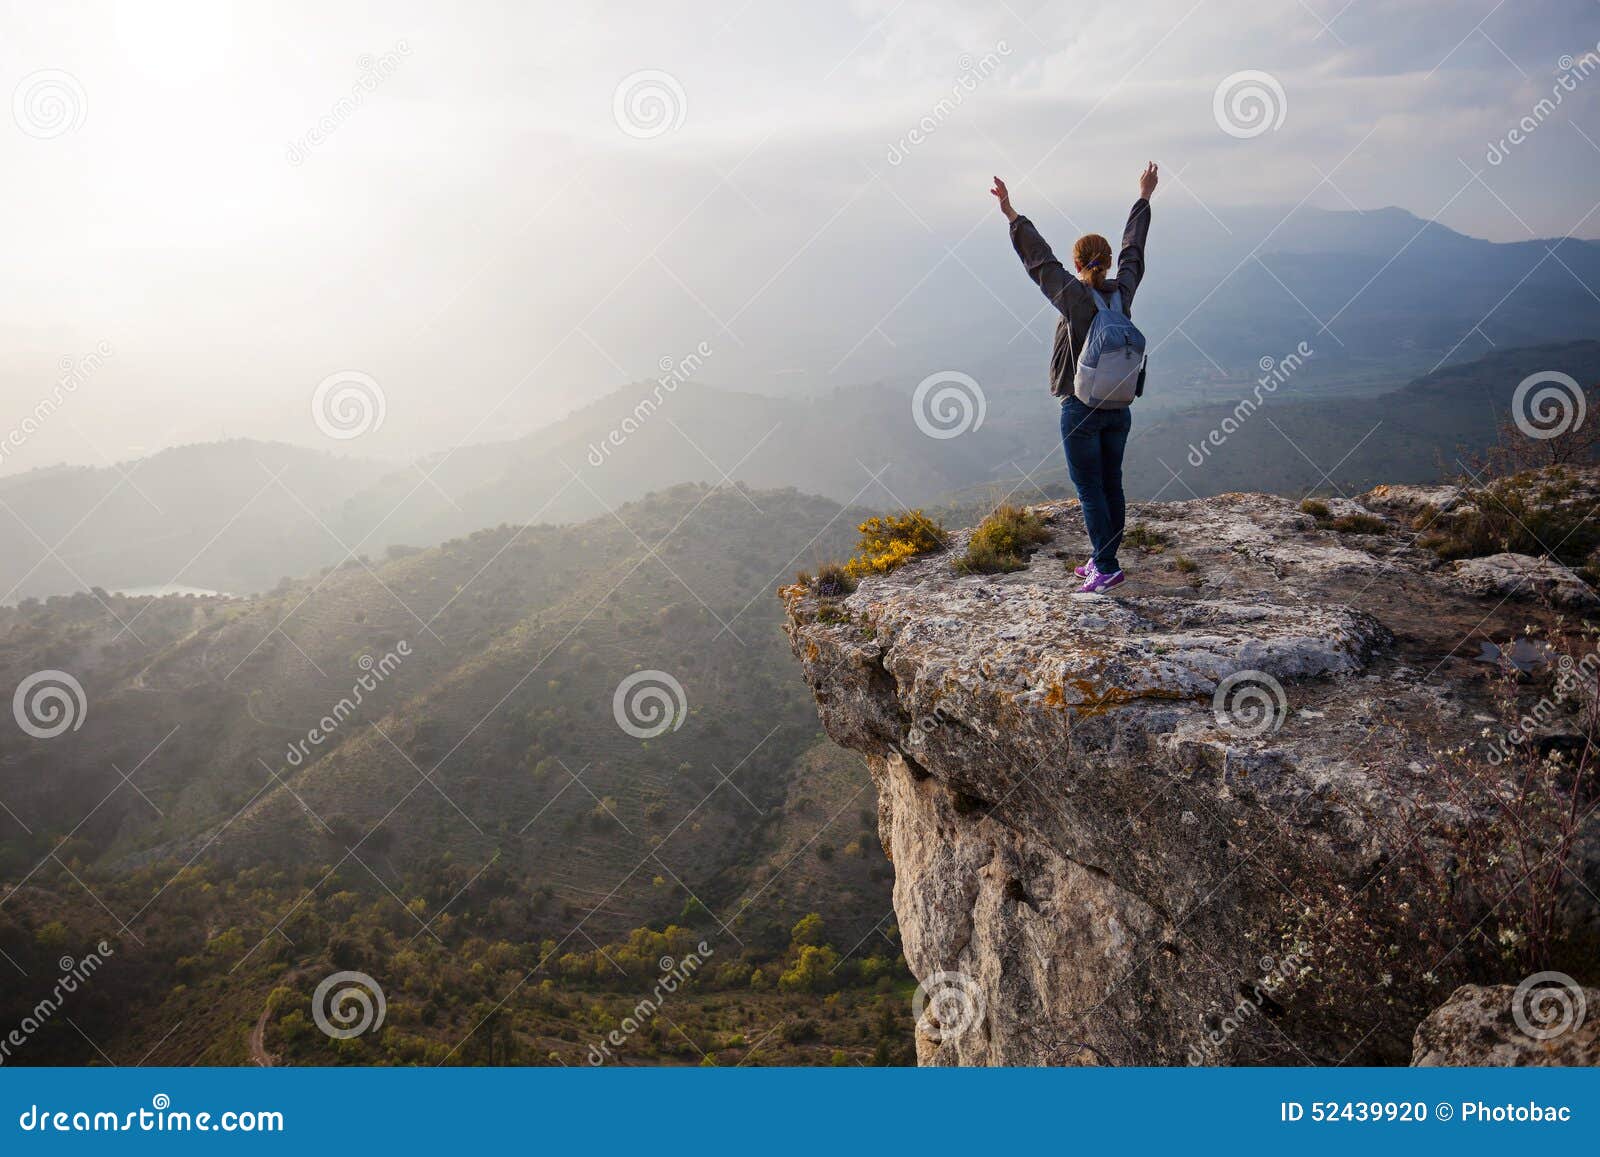 woman standing on cliff with outstretched arms